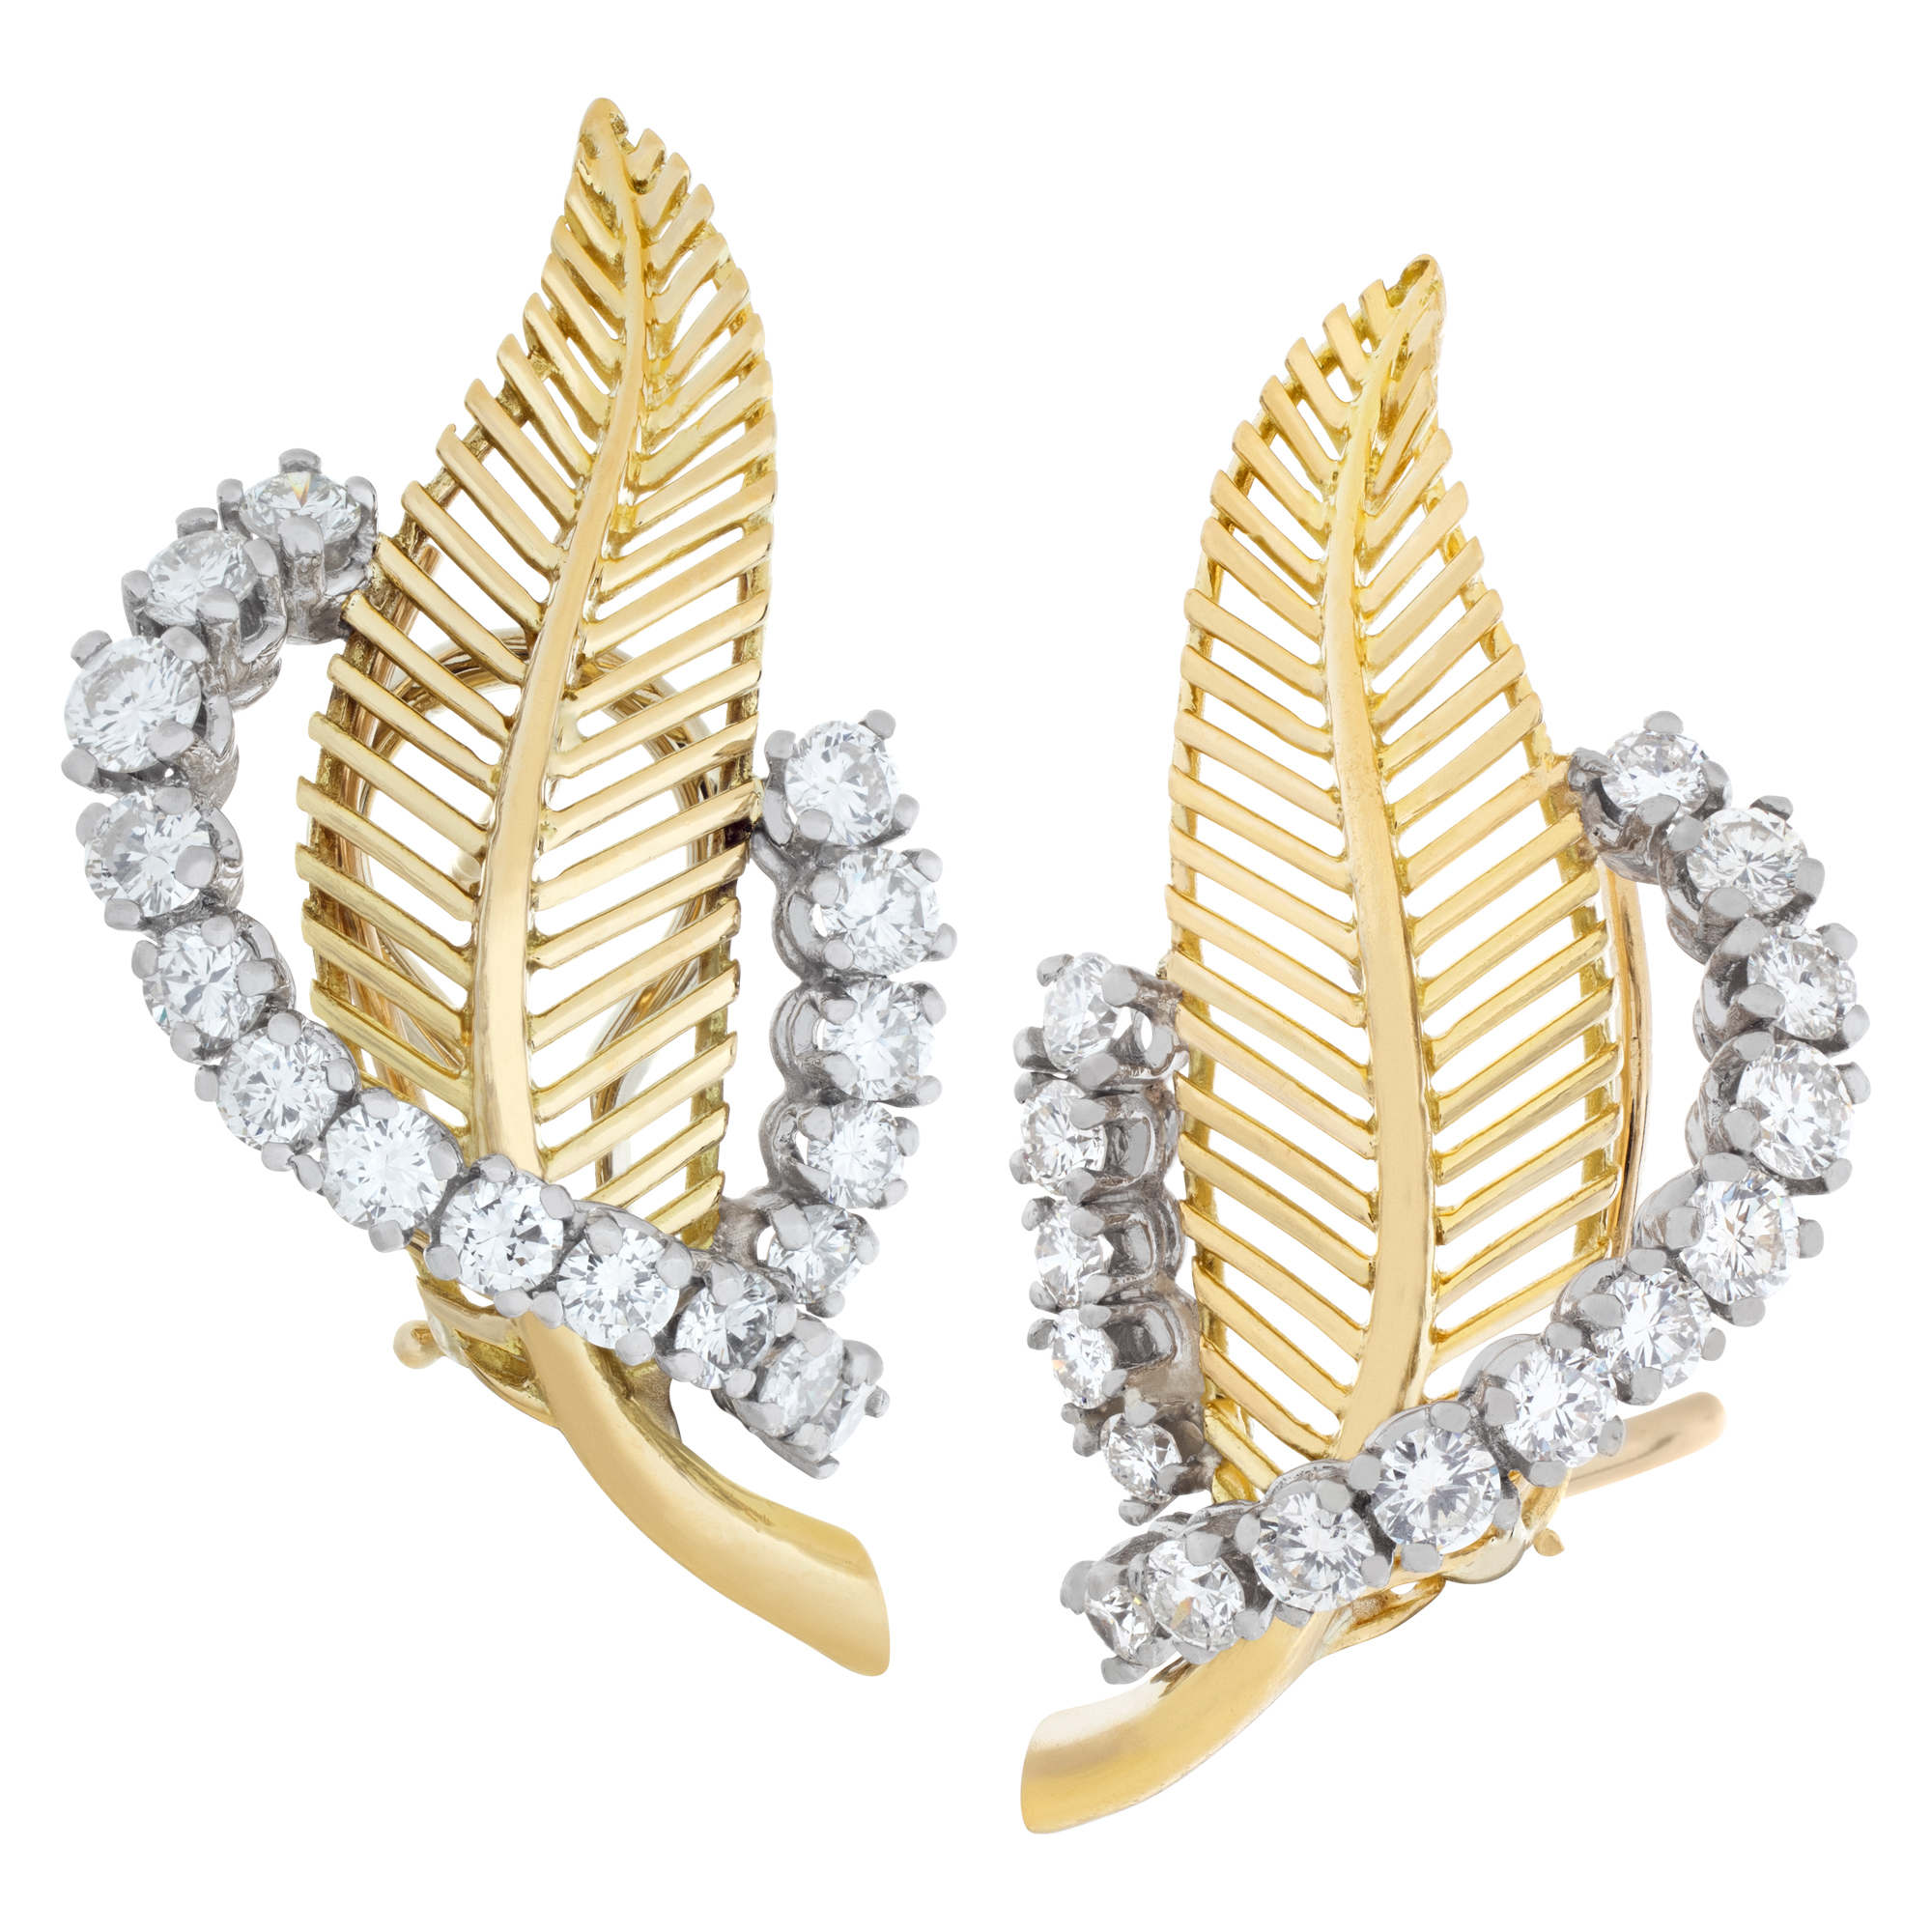 Leaf shaped diamond earrings in 18k yellow gold with Omega/post clip back. image 1